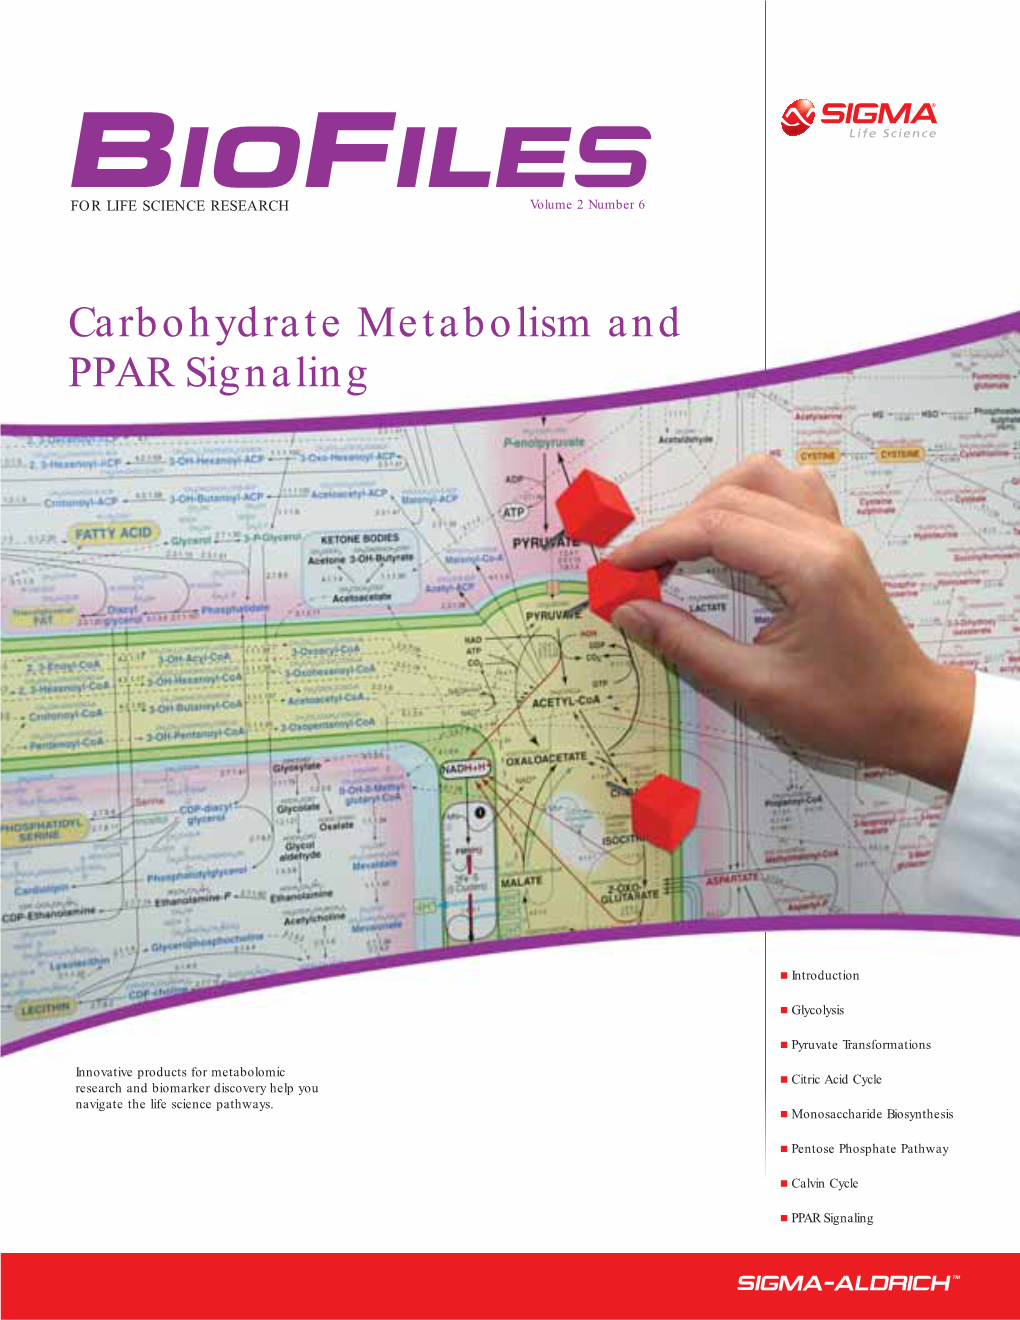 Carbohydrate Metabolism and PPAR Signaling